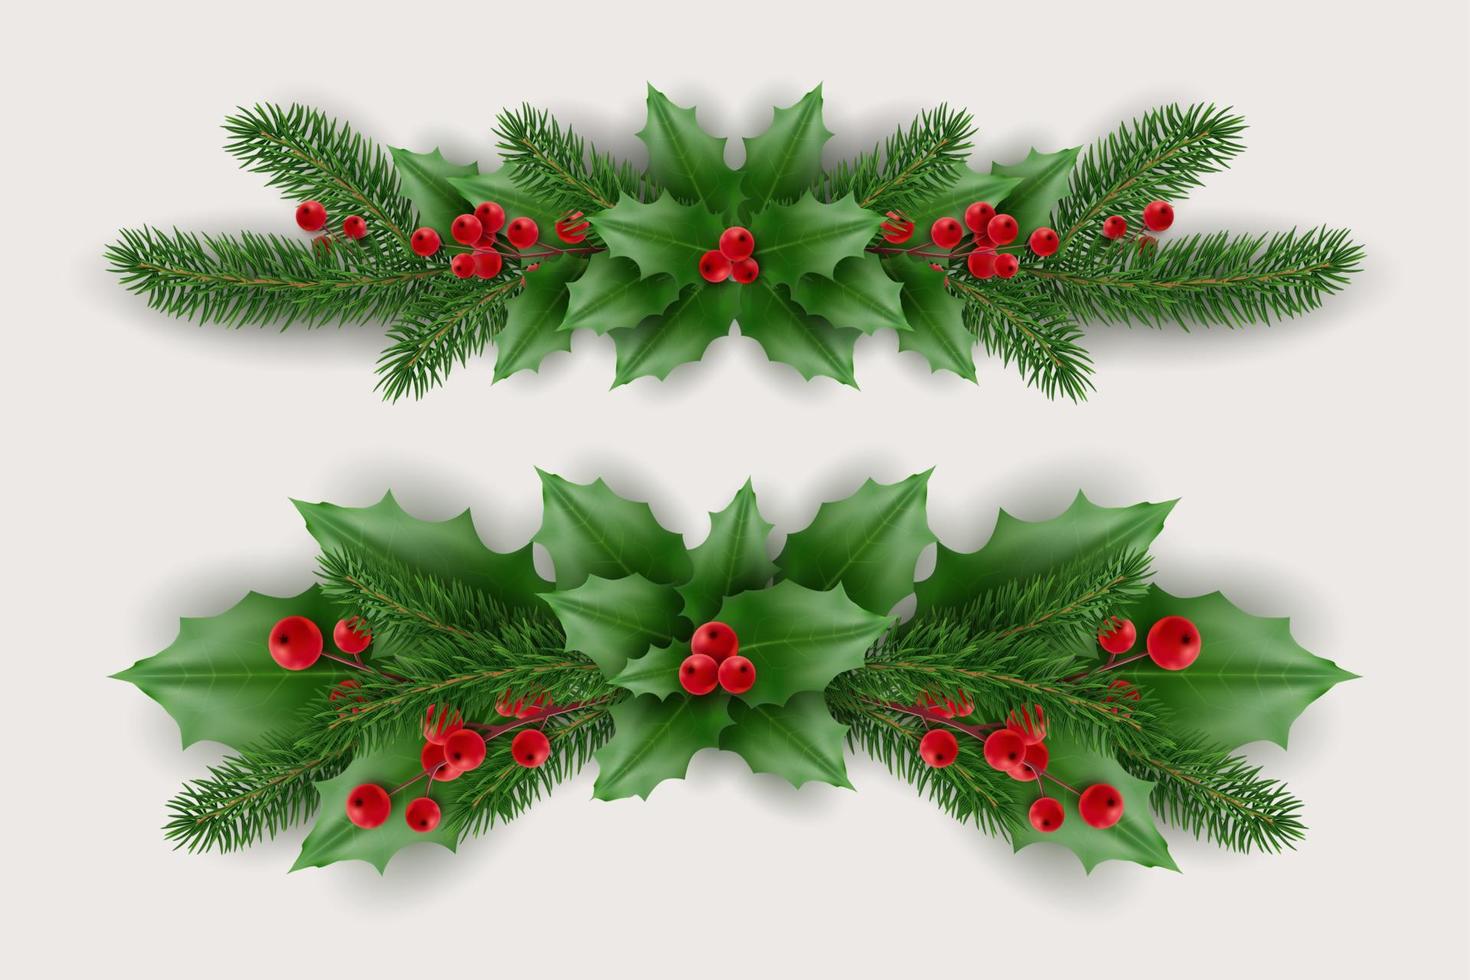 Christmas garland of tree branches, berries. Realistic looking Christmas tree branches decorated with berries and leaves vector